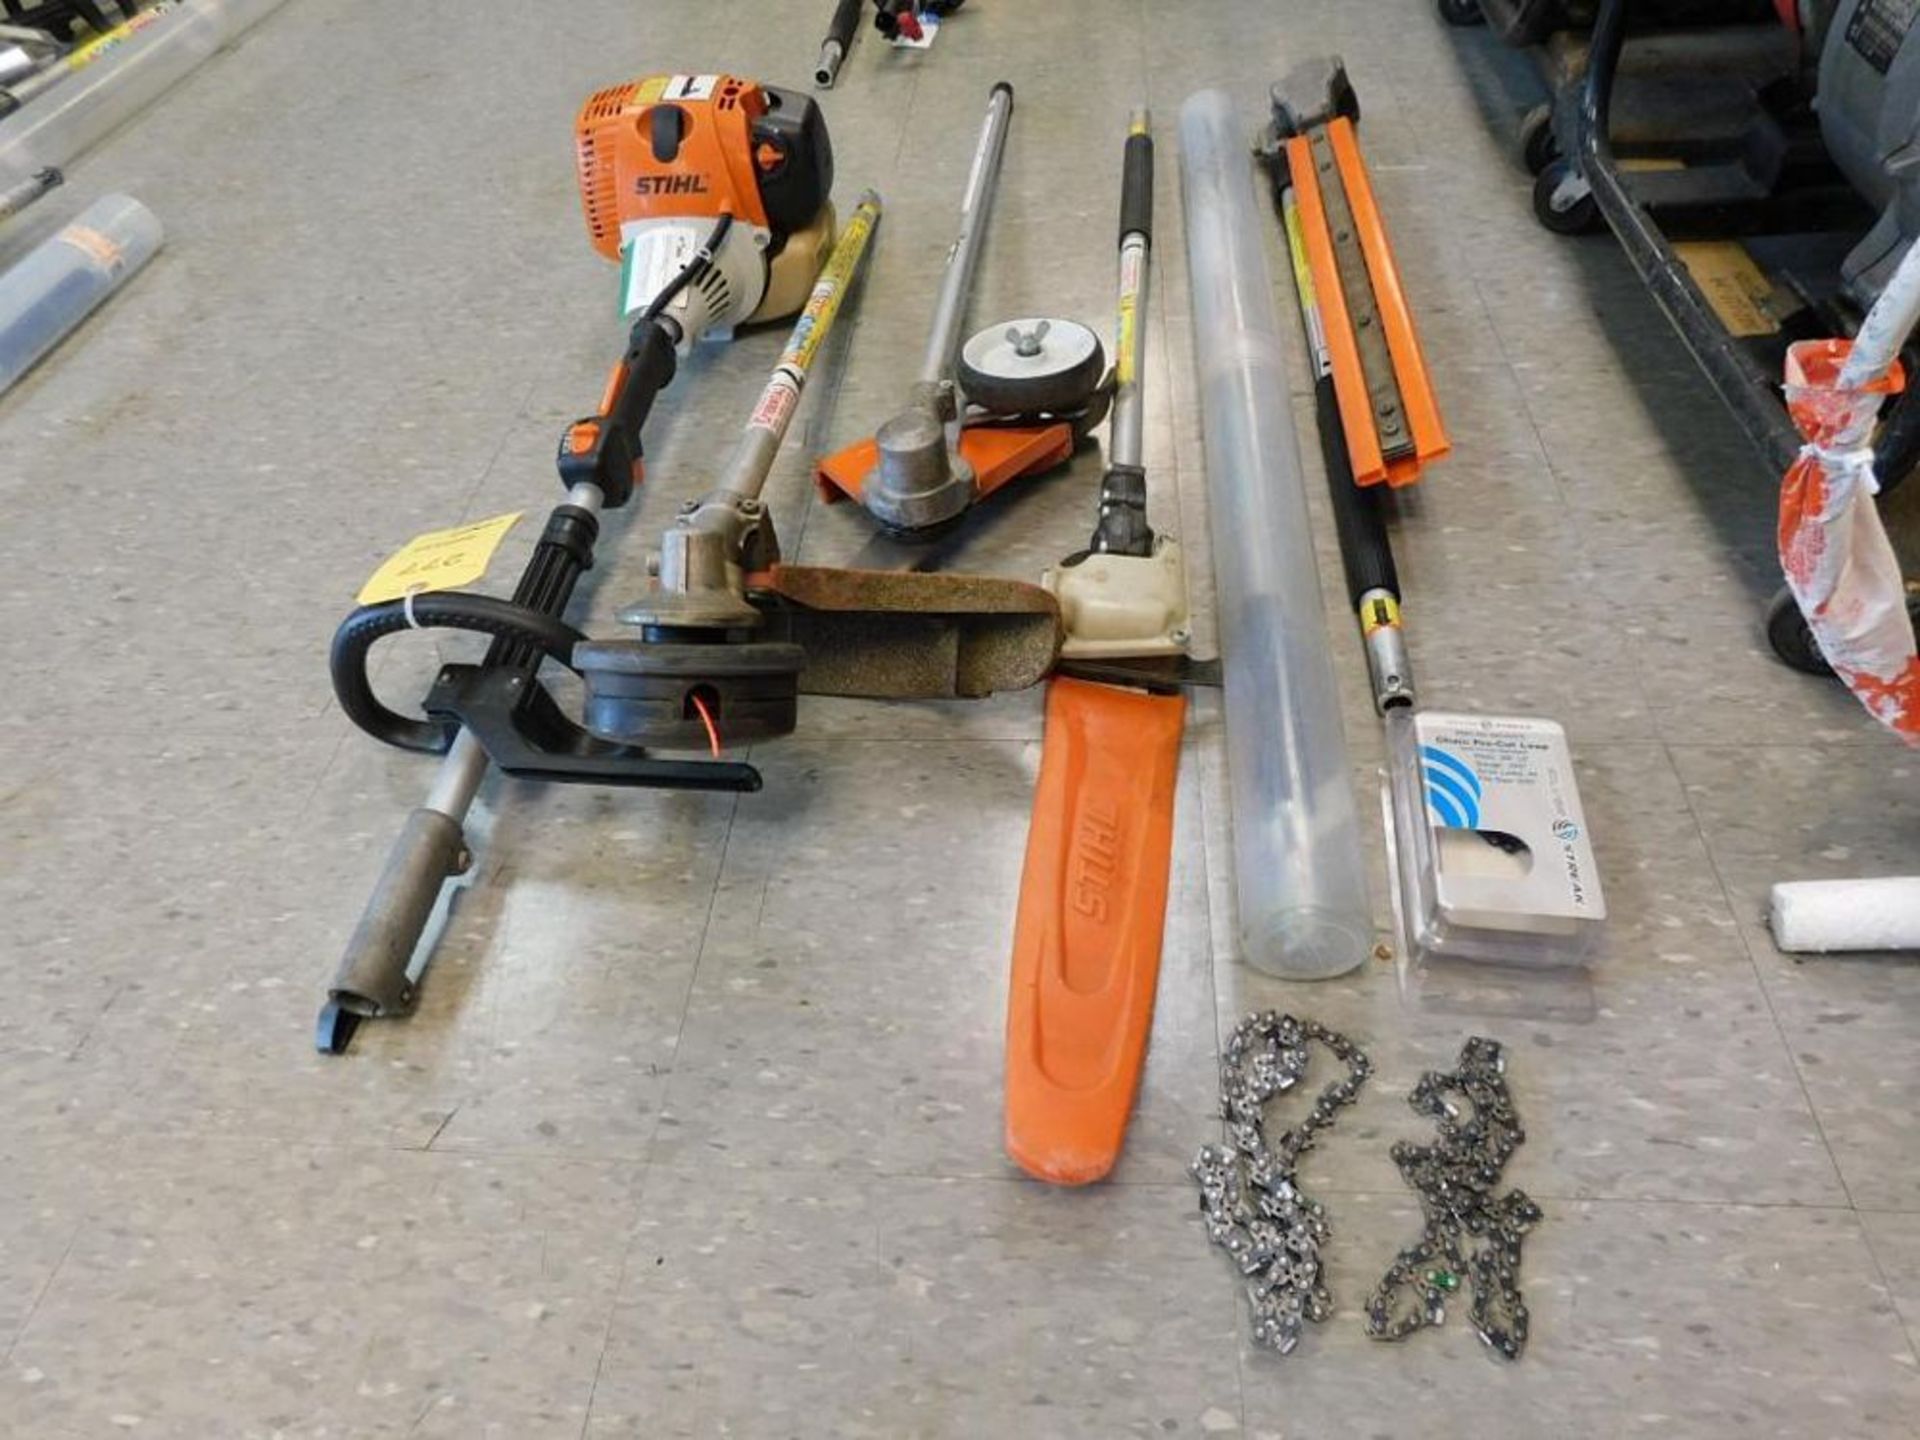 LOT: Stihl KM110R Gas Multi Tool w/Chain Saw, Edger Hedge Trimmer, Weed Whacker, Extension - Image 3 of 5